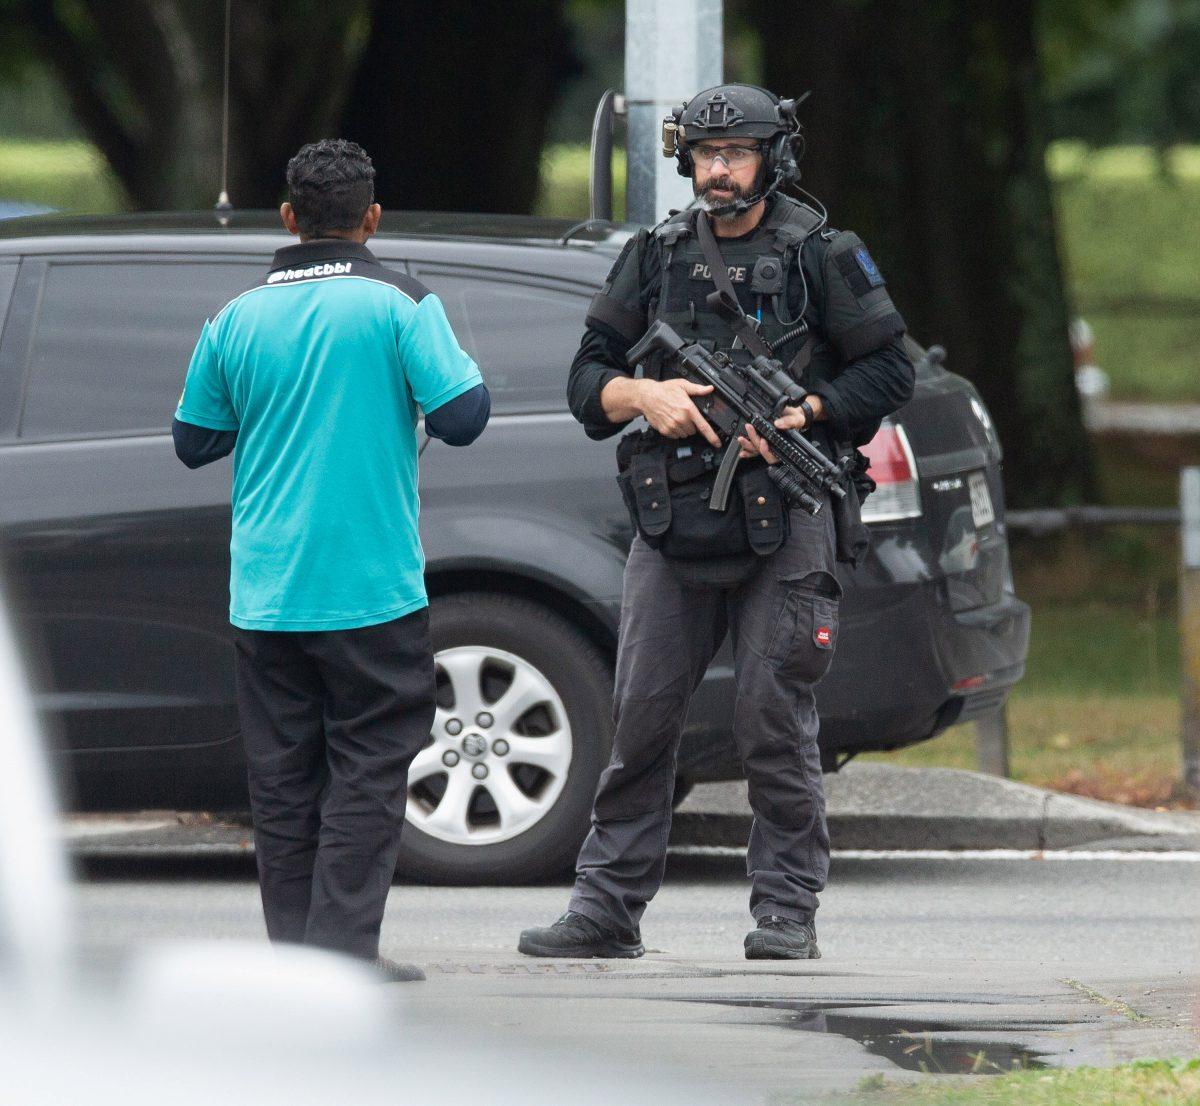 A member of the AOS (Armed Offenders Squad) stands ready following a shooting at the Al Noor mosque in Christchurch, New Zealand, on March 15, 2019. (Martin Hunter/Reuters/SNPA)